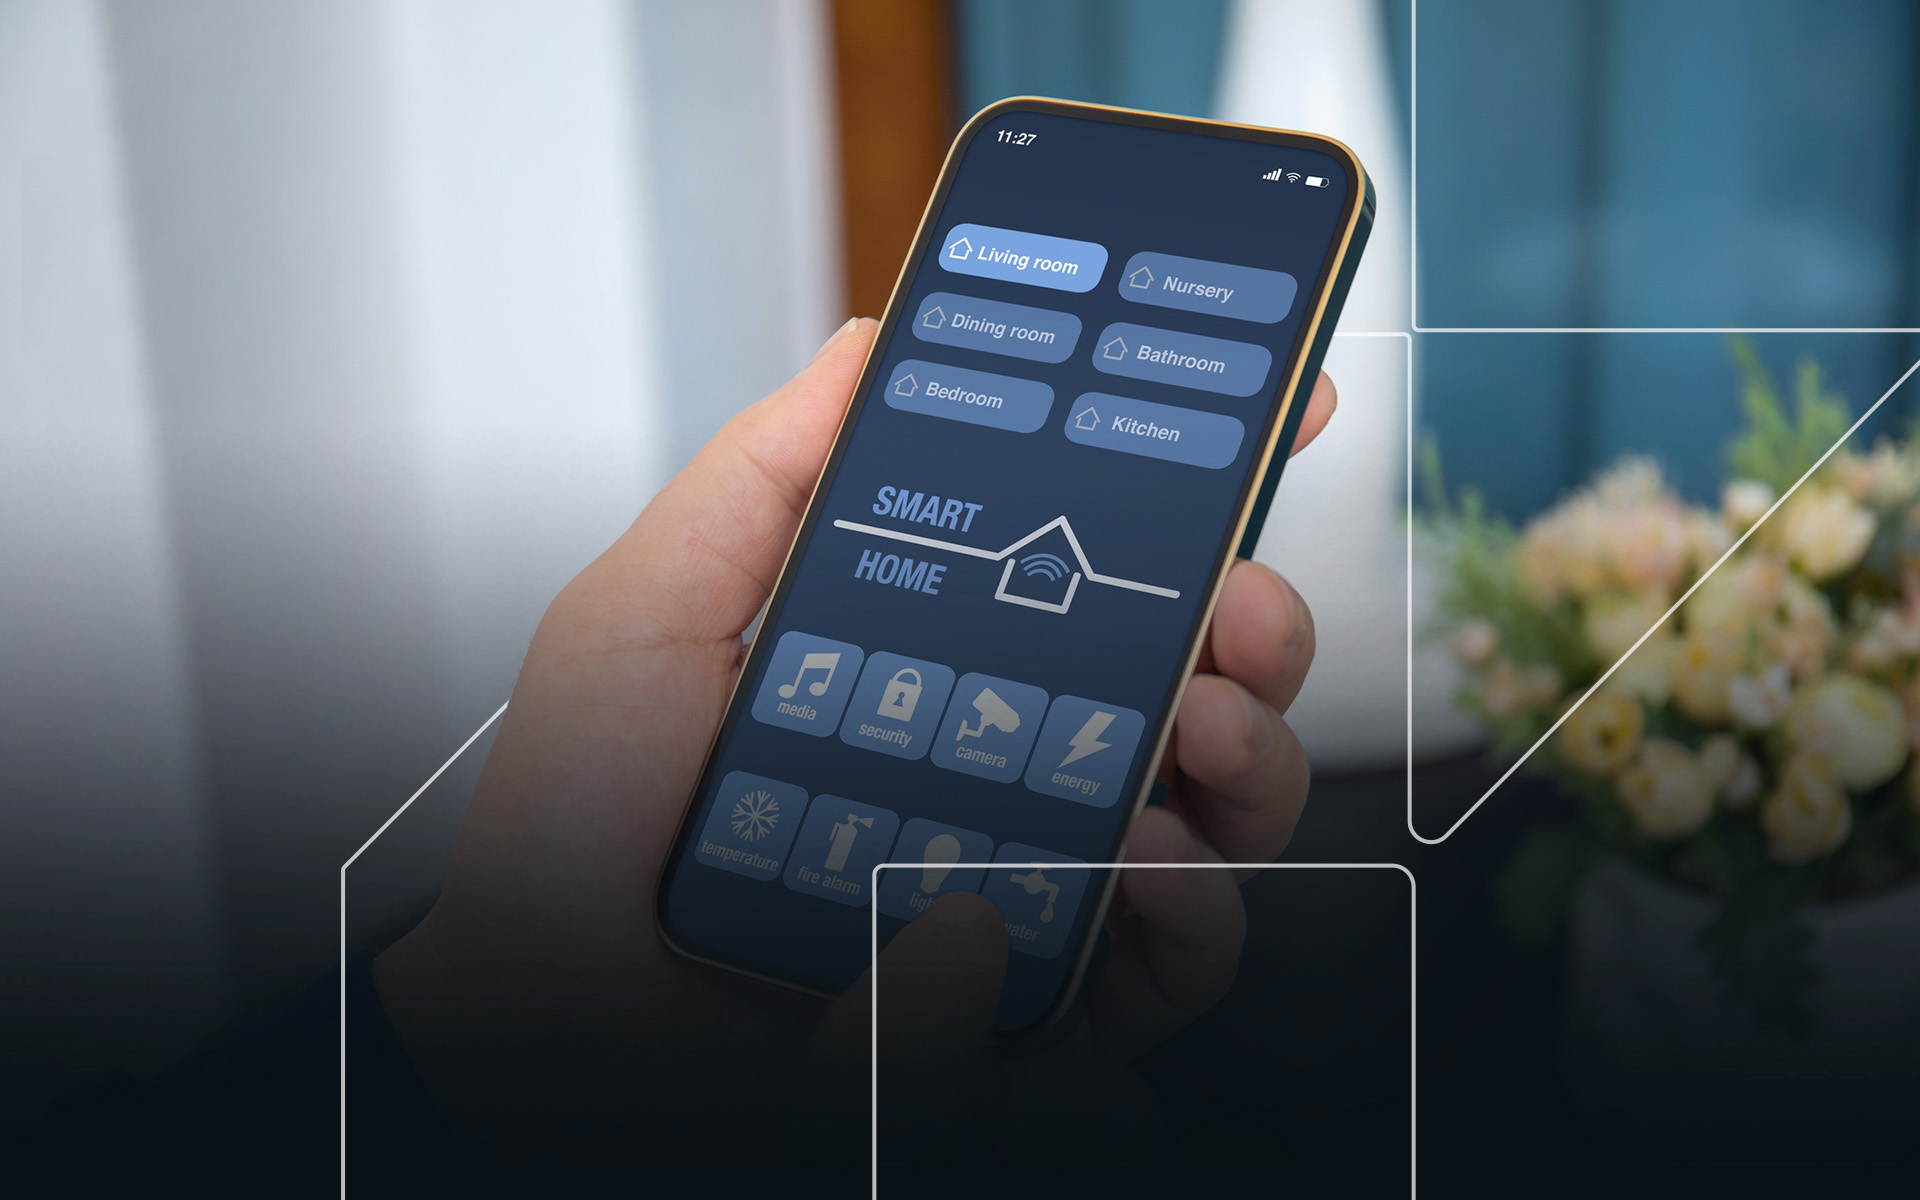 8 Best Remote Monitoring Systems for Smart Homes in 2021